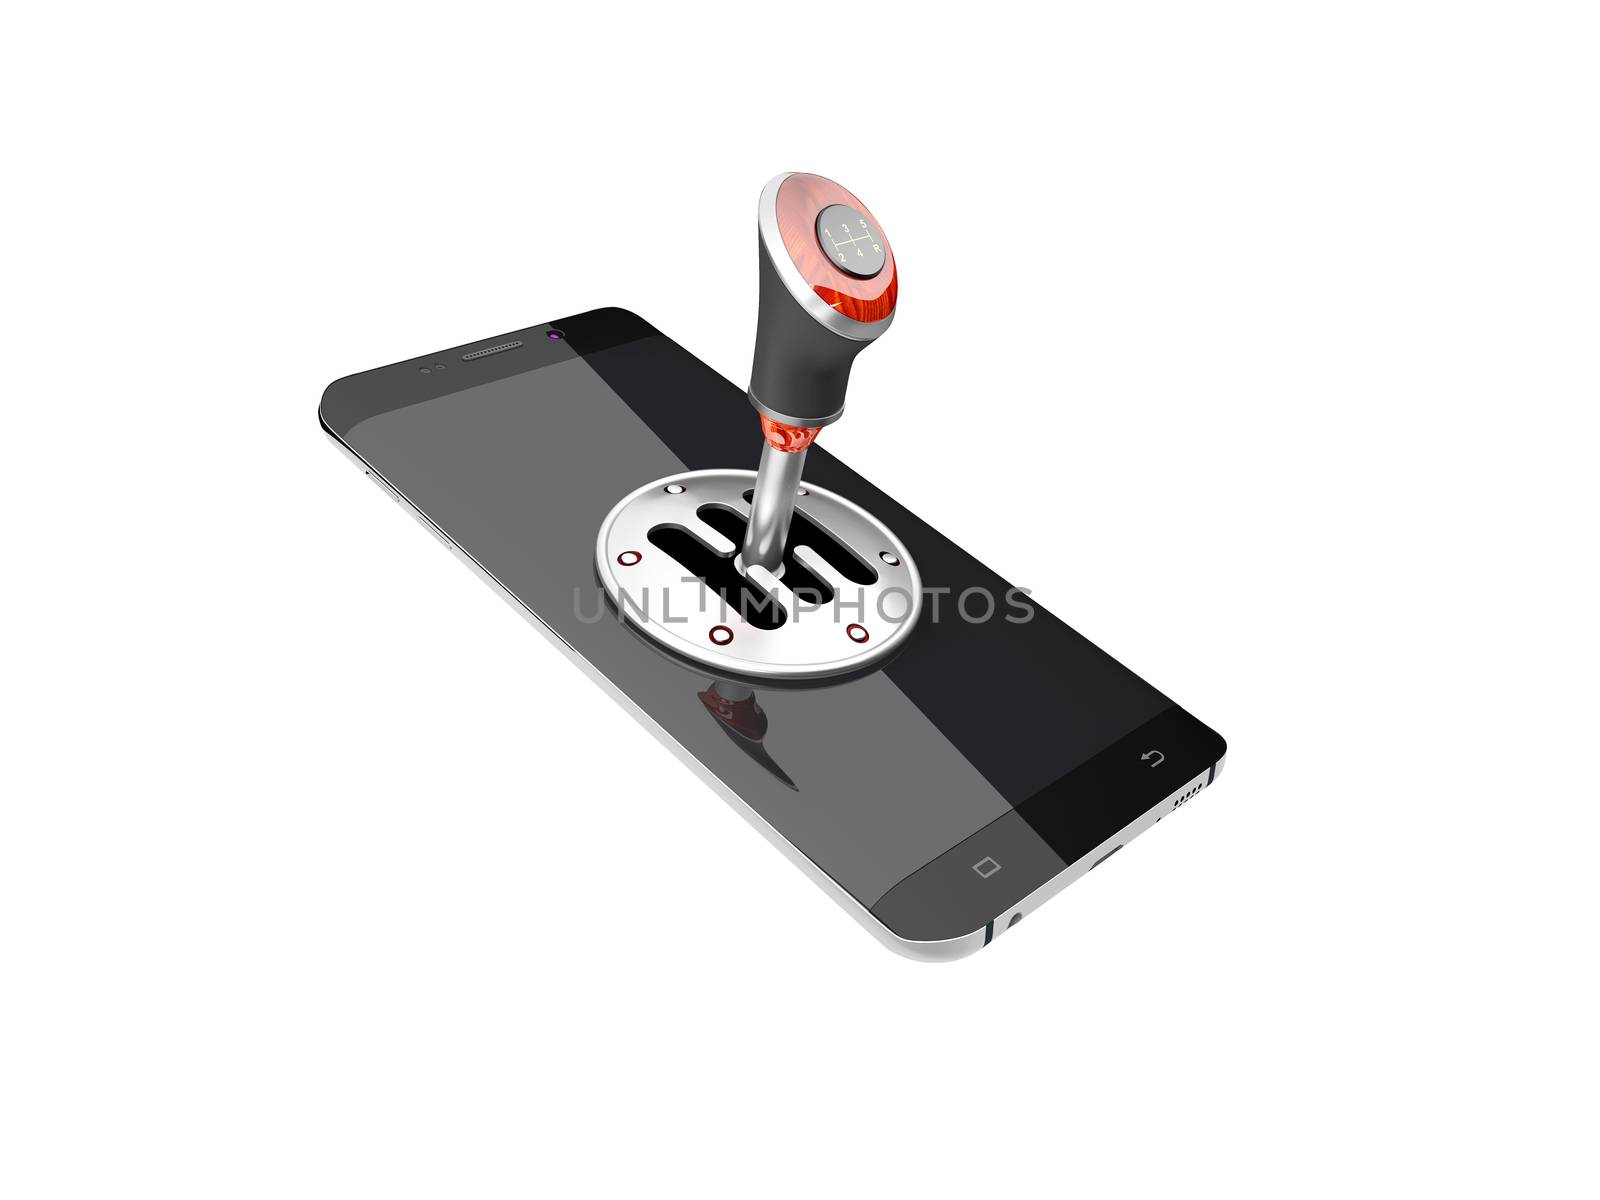 Mobile phone with gear stick isolated on white background 3D illustration